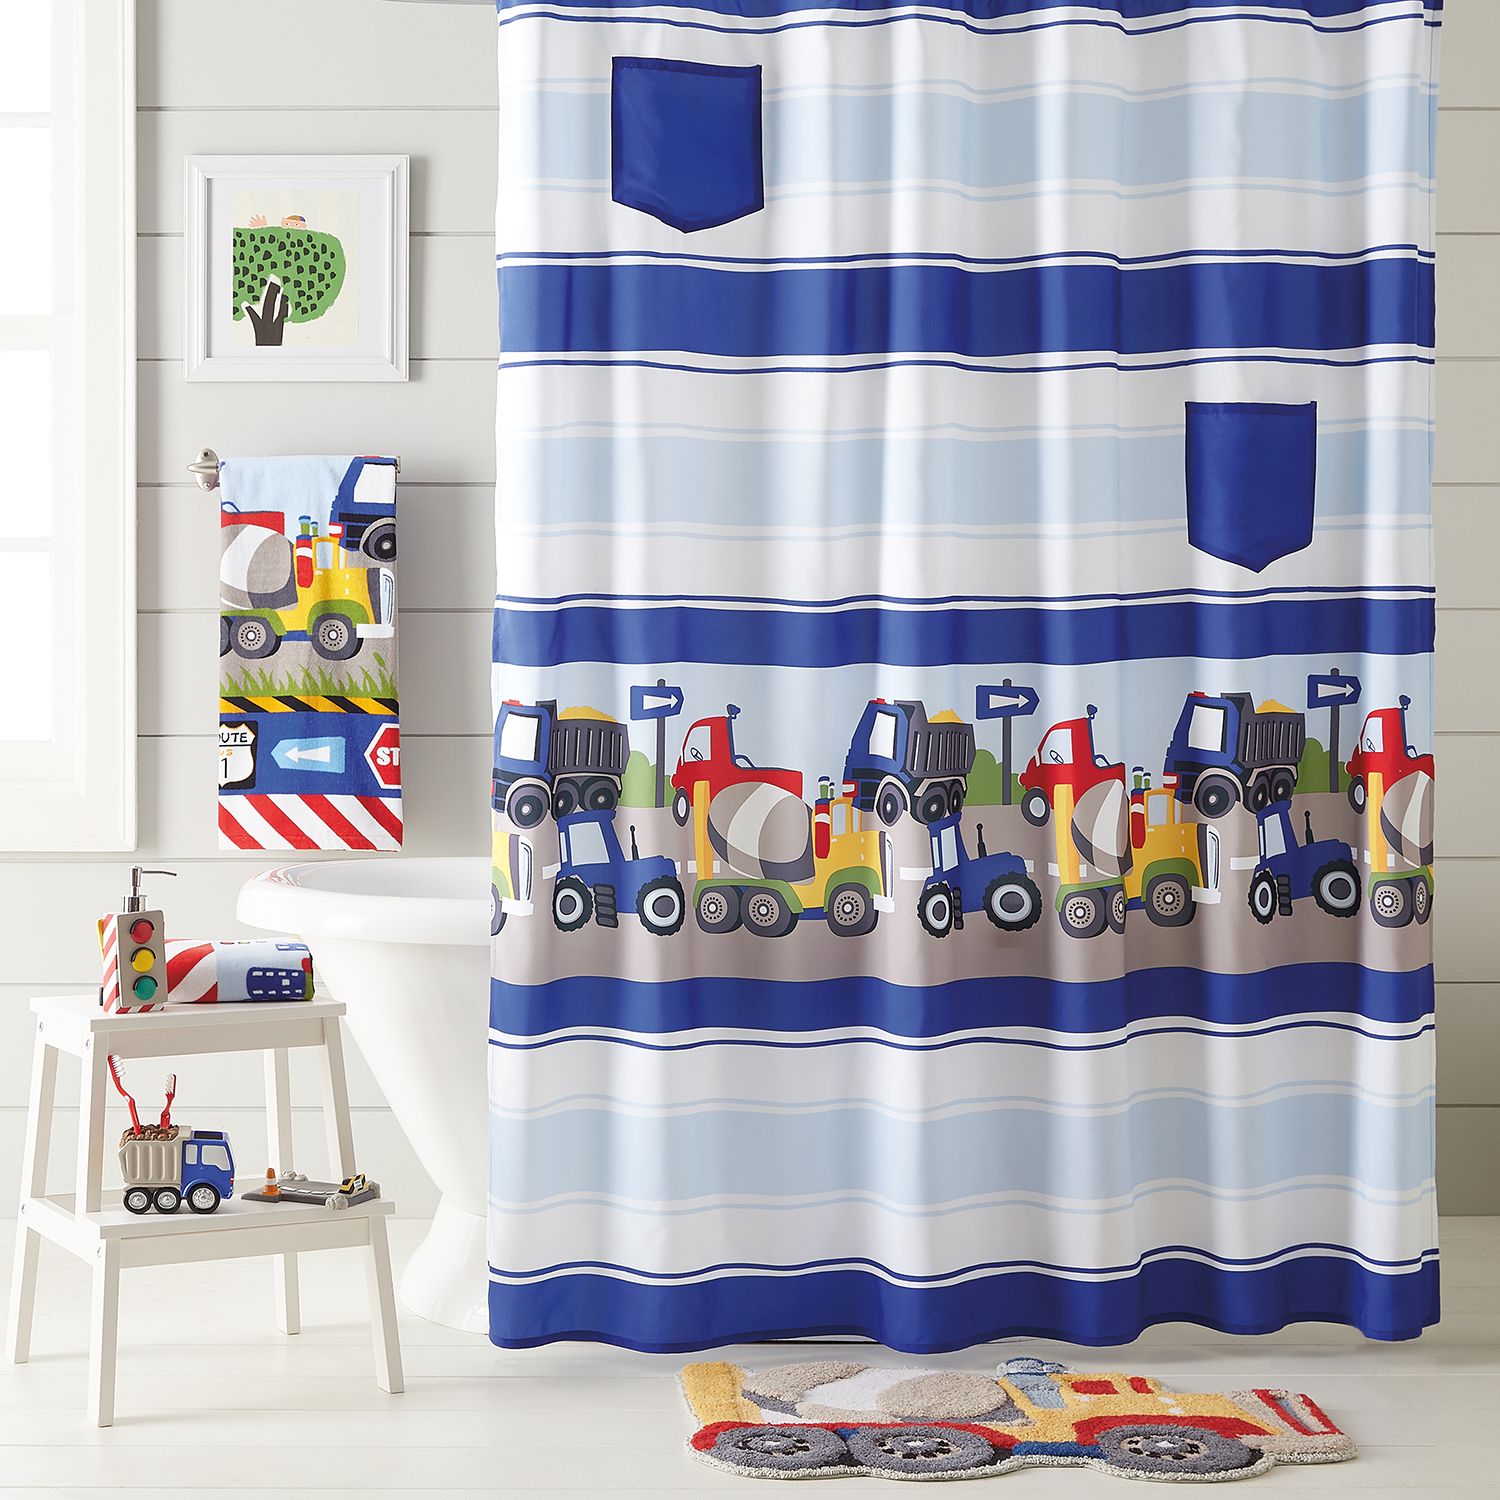 Image for Dream Factory Trains & Trucks Shower Curtain at Kohl's.